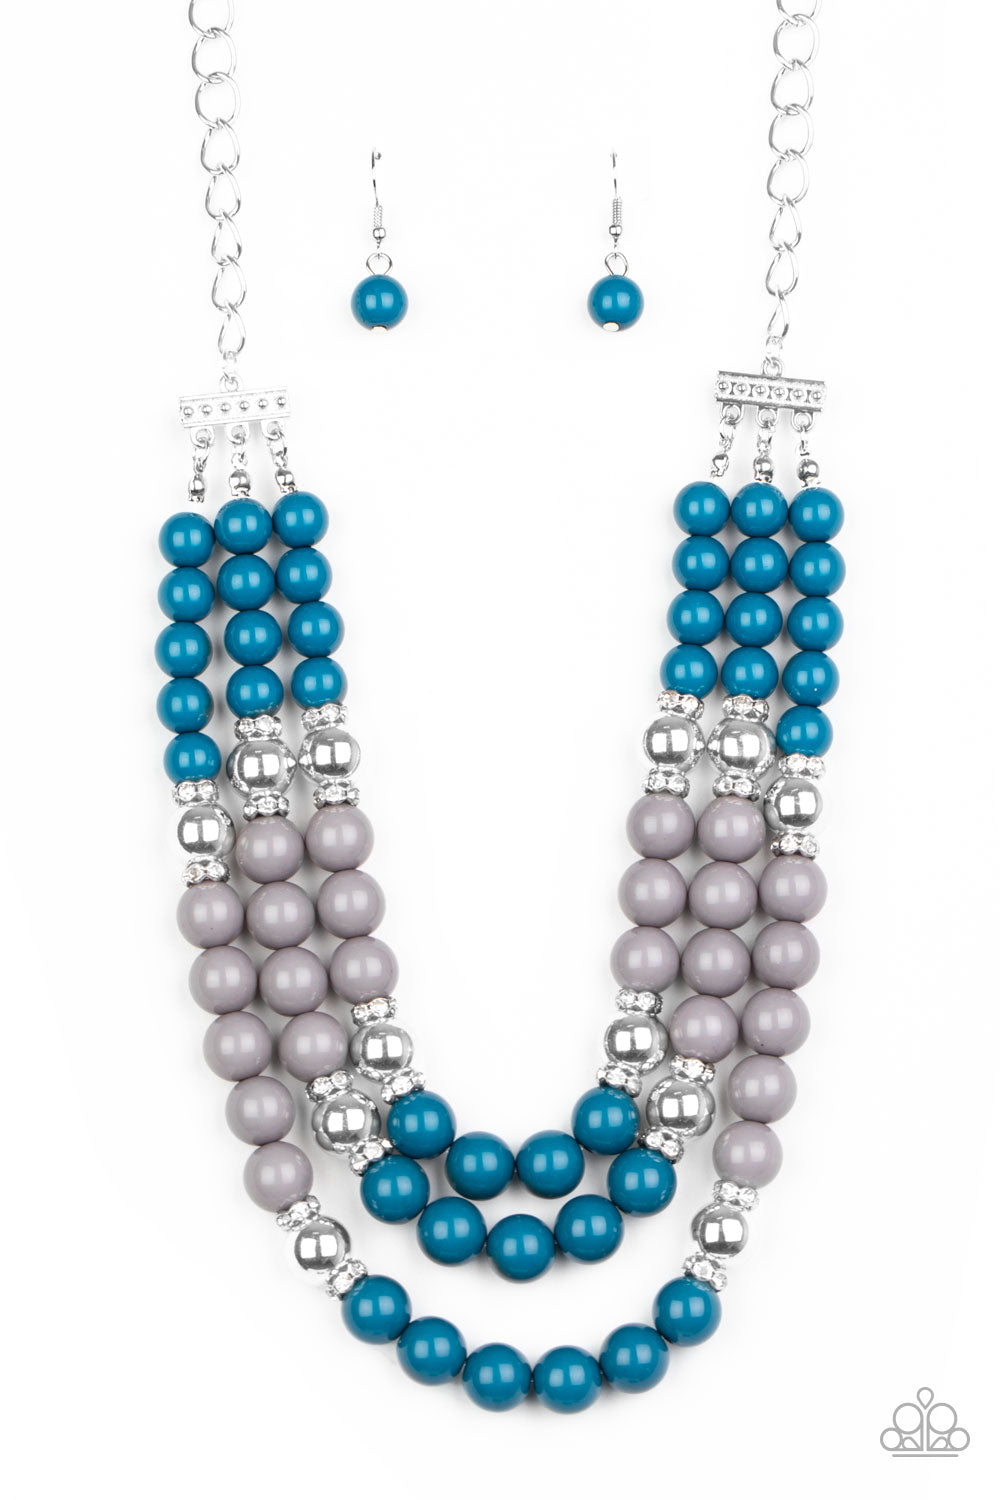 Paparazzi Accessories BEAD Your Own Drum - Blue Necklaces - Lady T Accessories